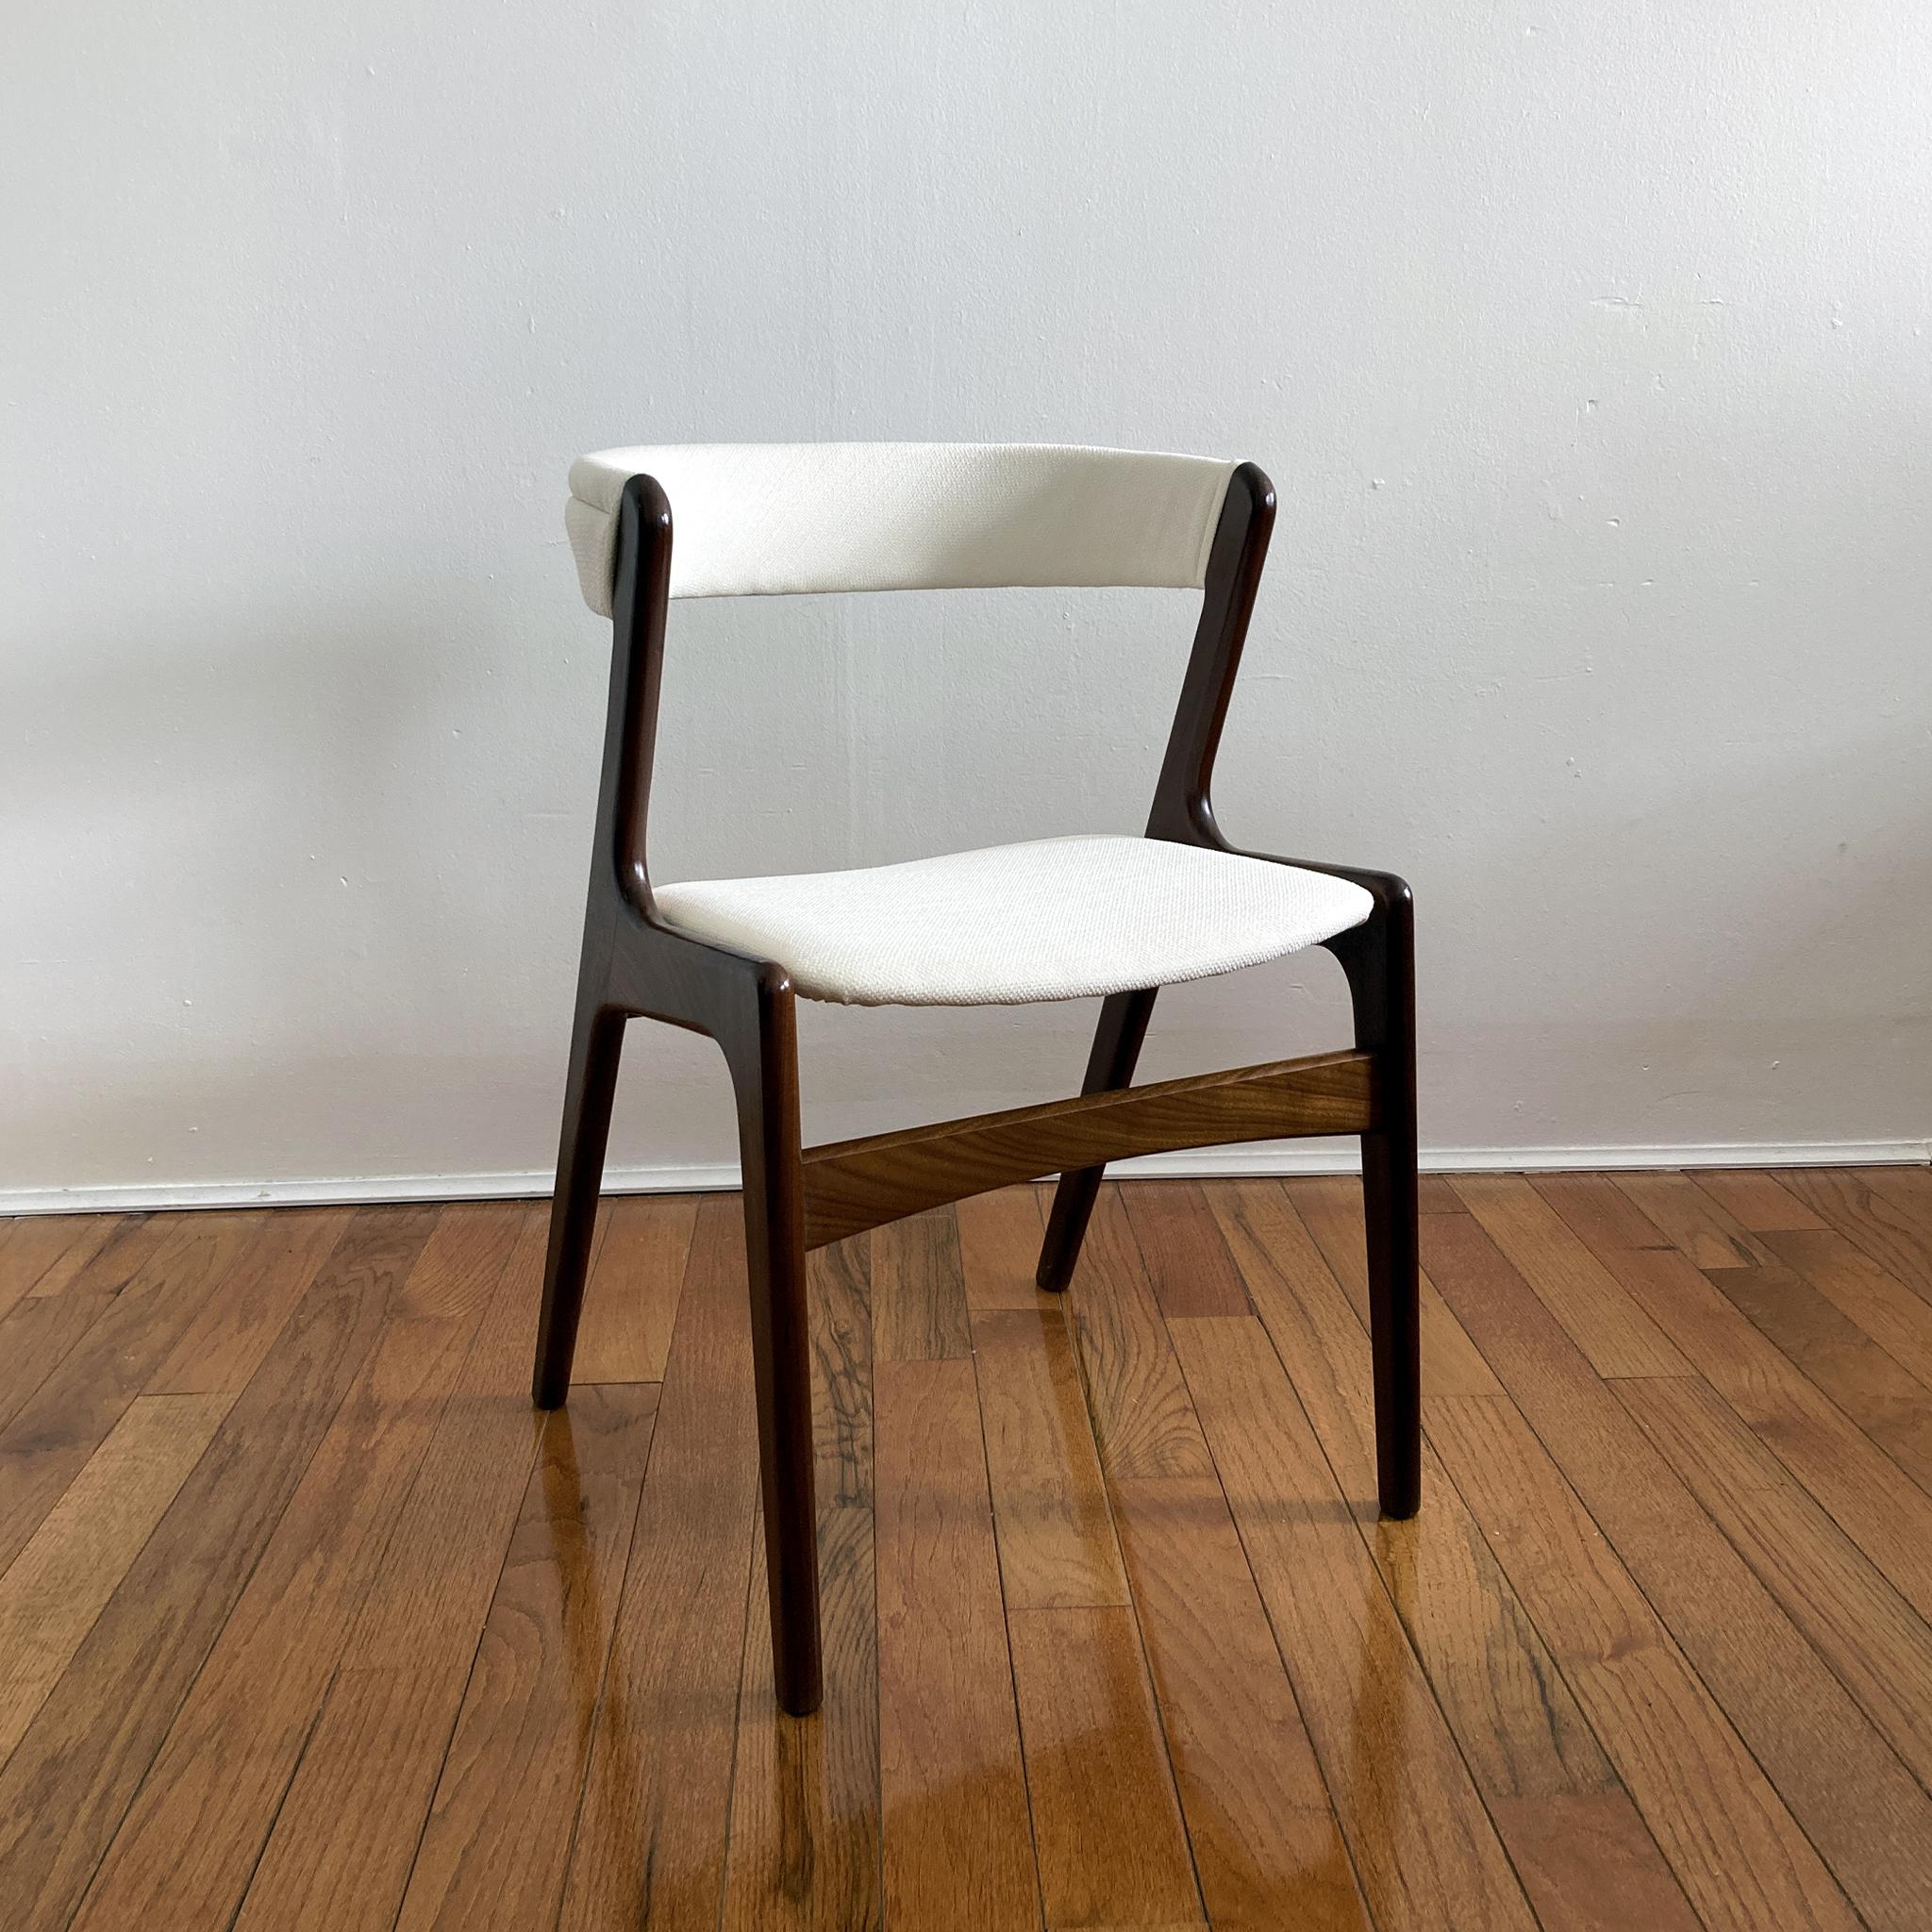 Mid-20th Century Kai Kristiansen Ivory Tweed Curved Back Teak Chairs, Danish, 1960s, Pair of Two For Sale